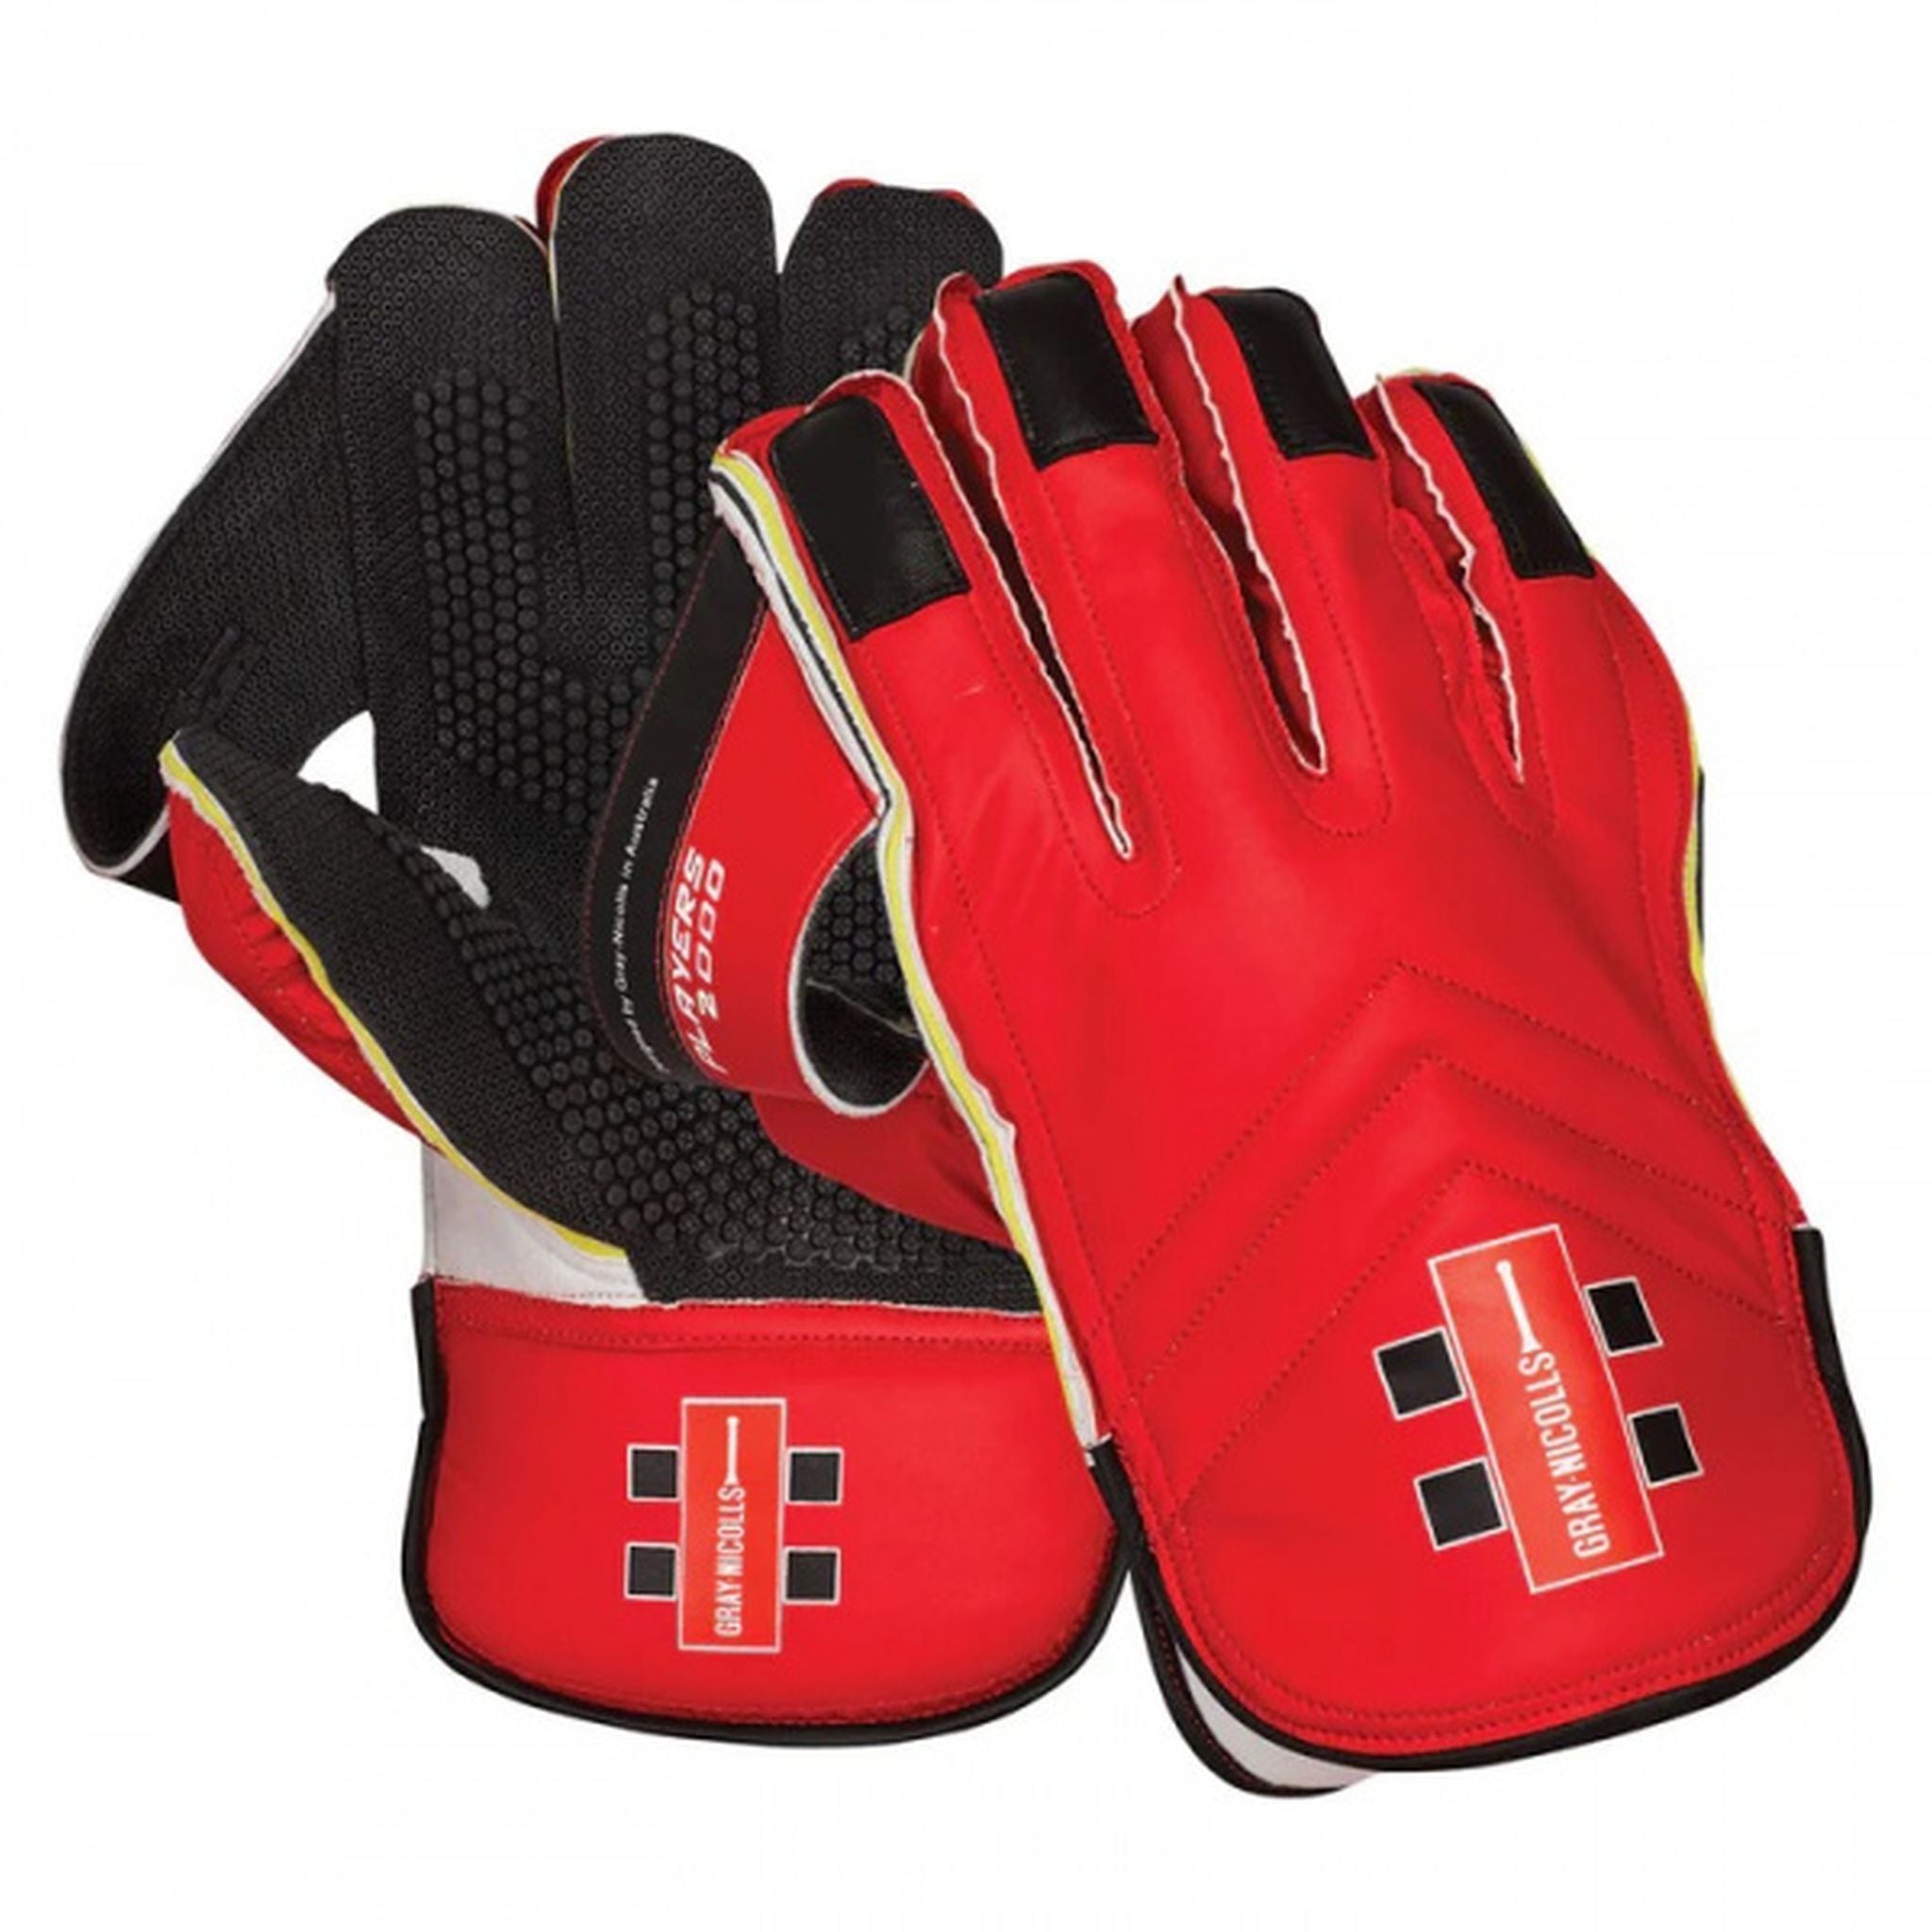 Gray-Nicolls Players 2000 Adult Wicket Keeping Gloves